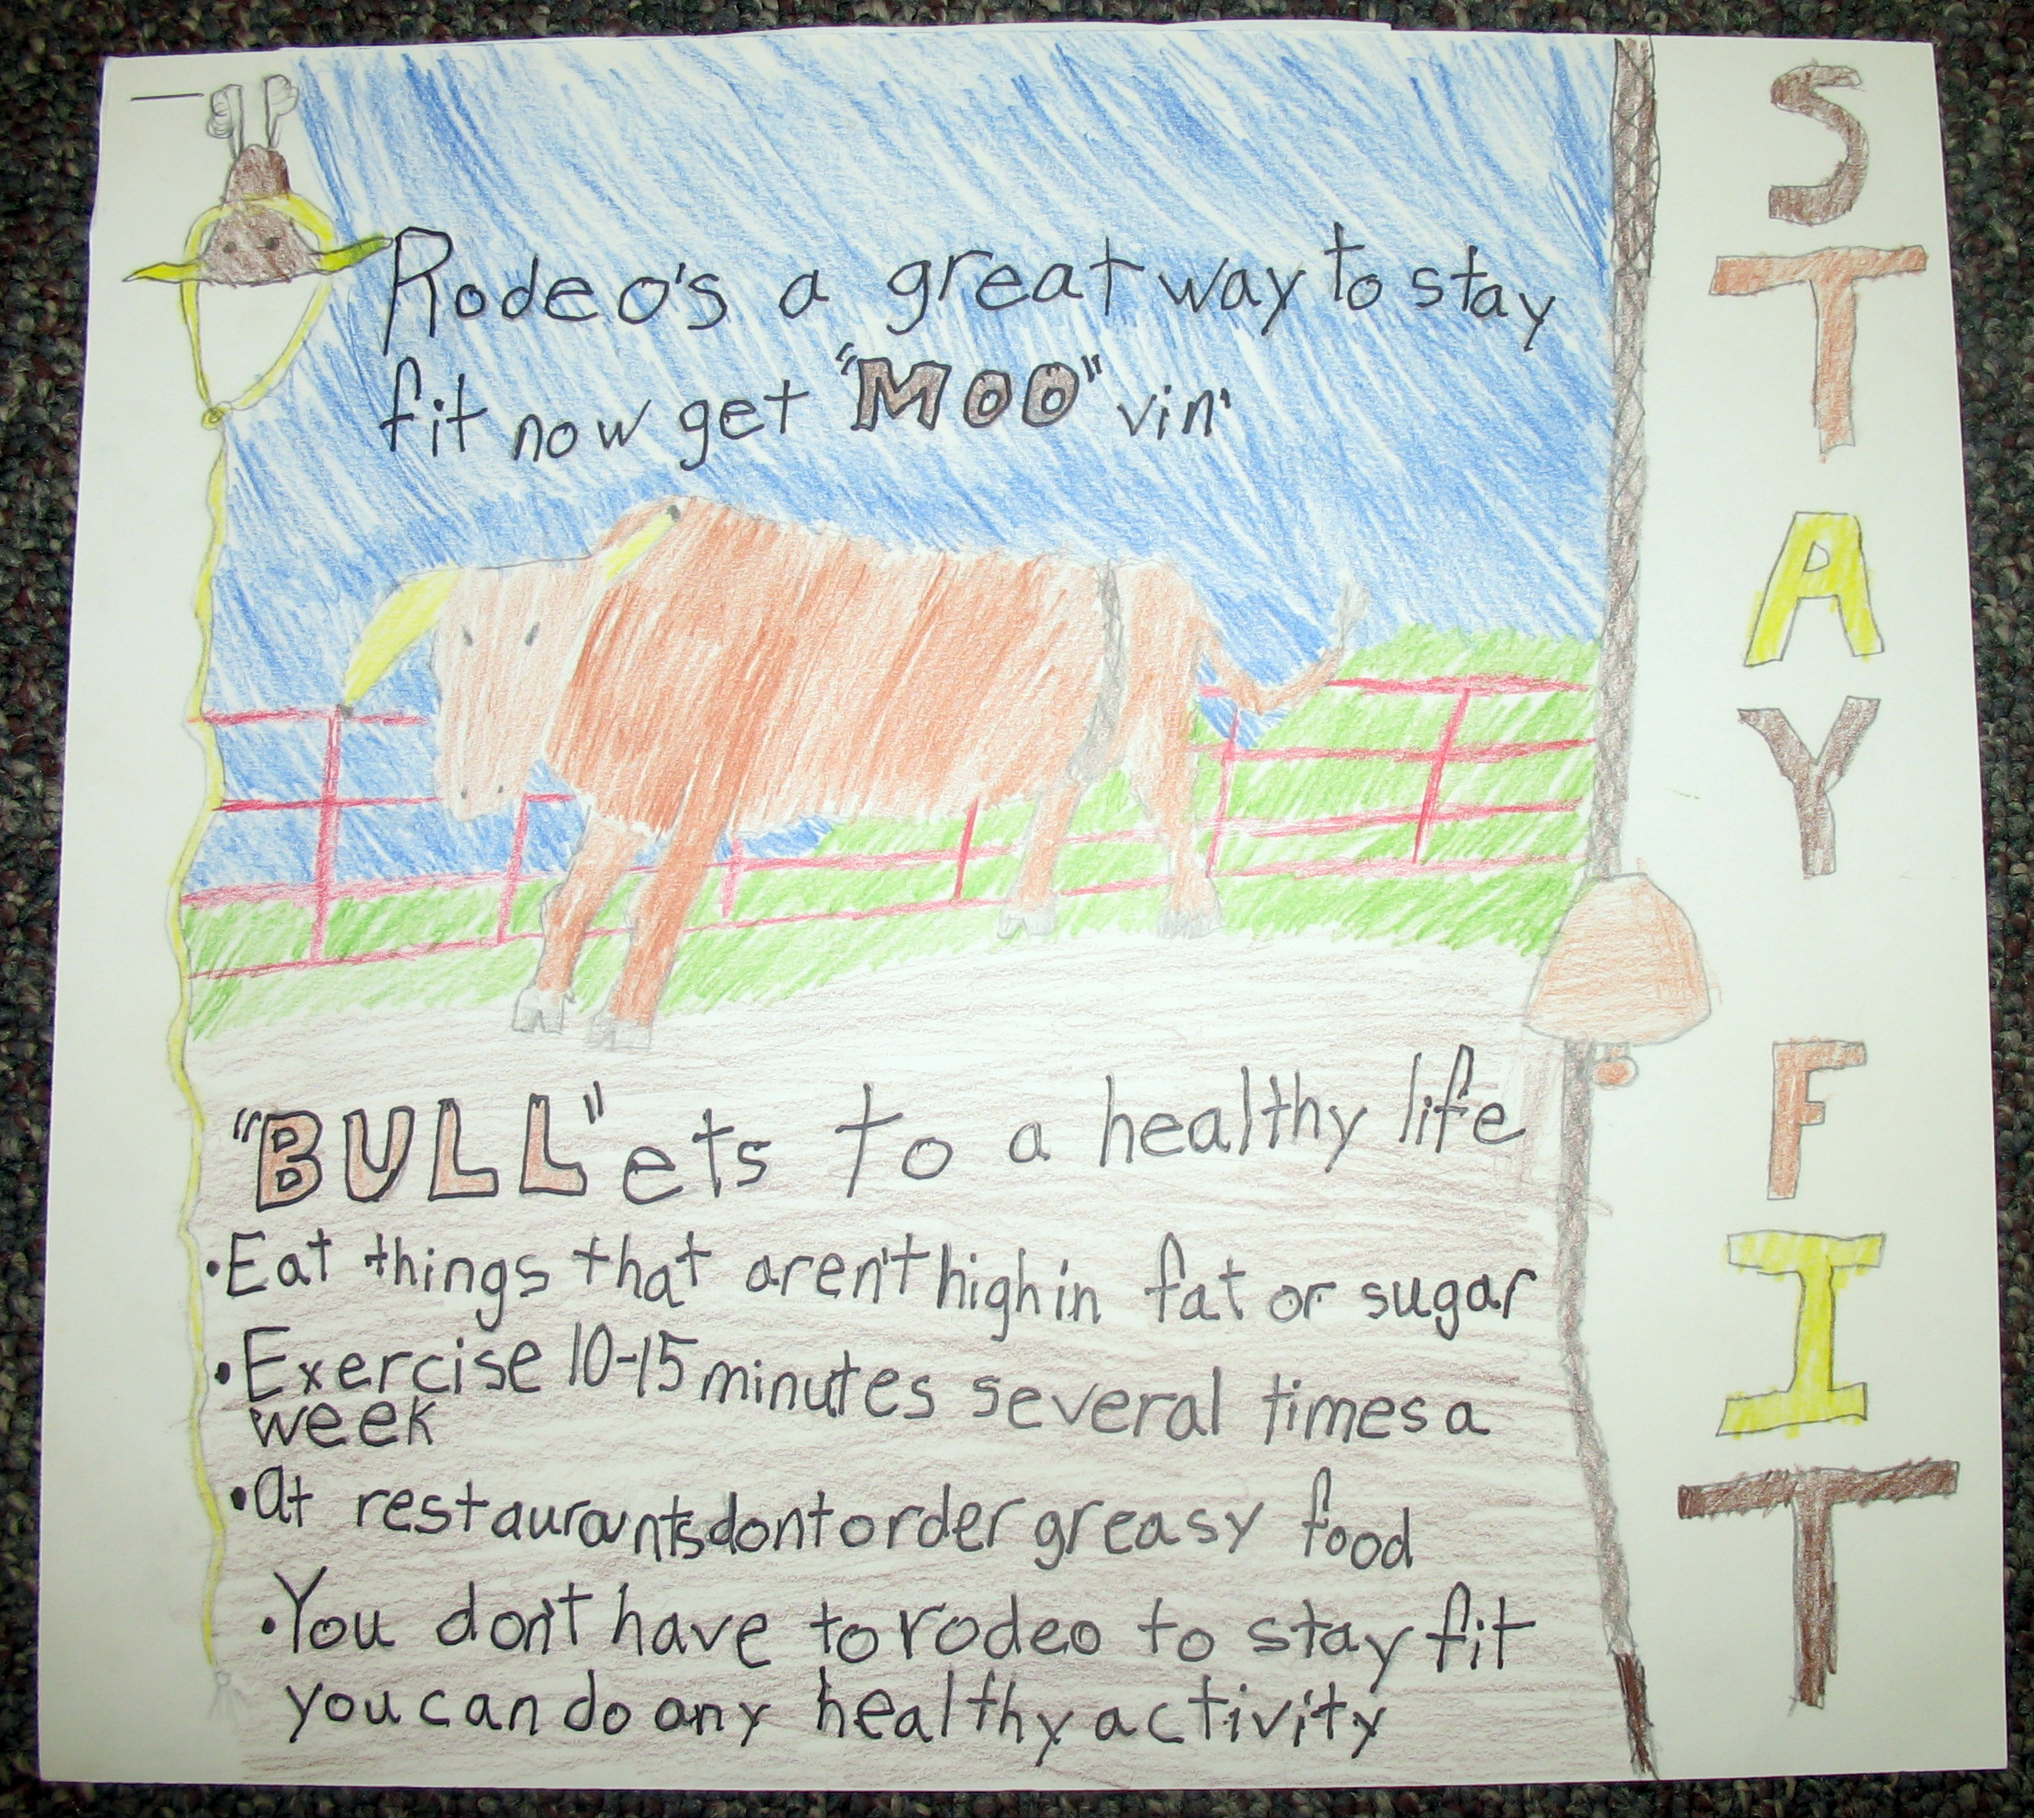 Cole Peterson, a student at the Burlington-Des Lacs Elementary School, won third place with this poster in the preteen division of the ""Eat Smart. Play Hard."" poster contest.